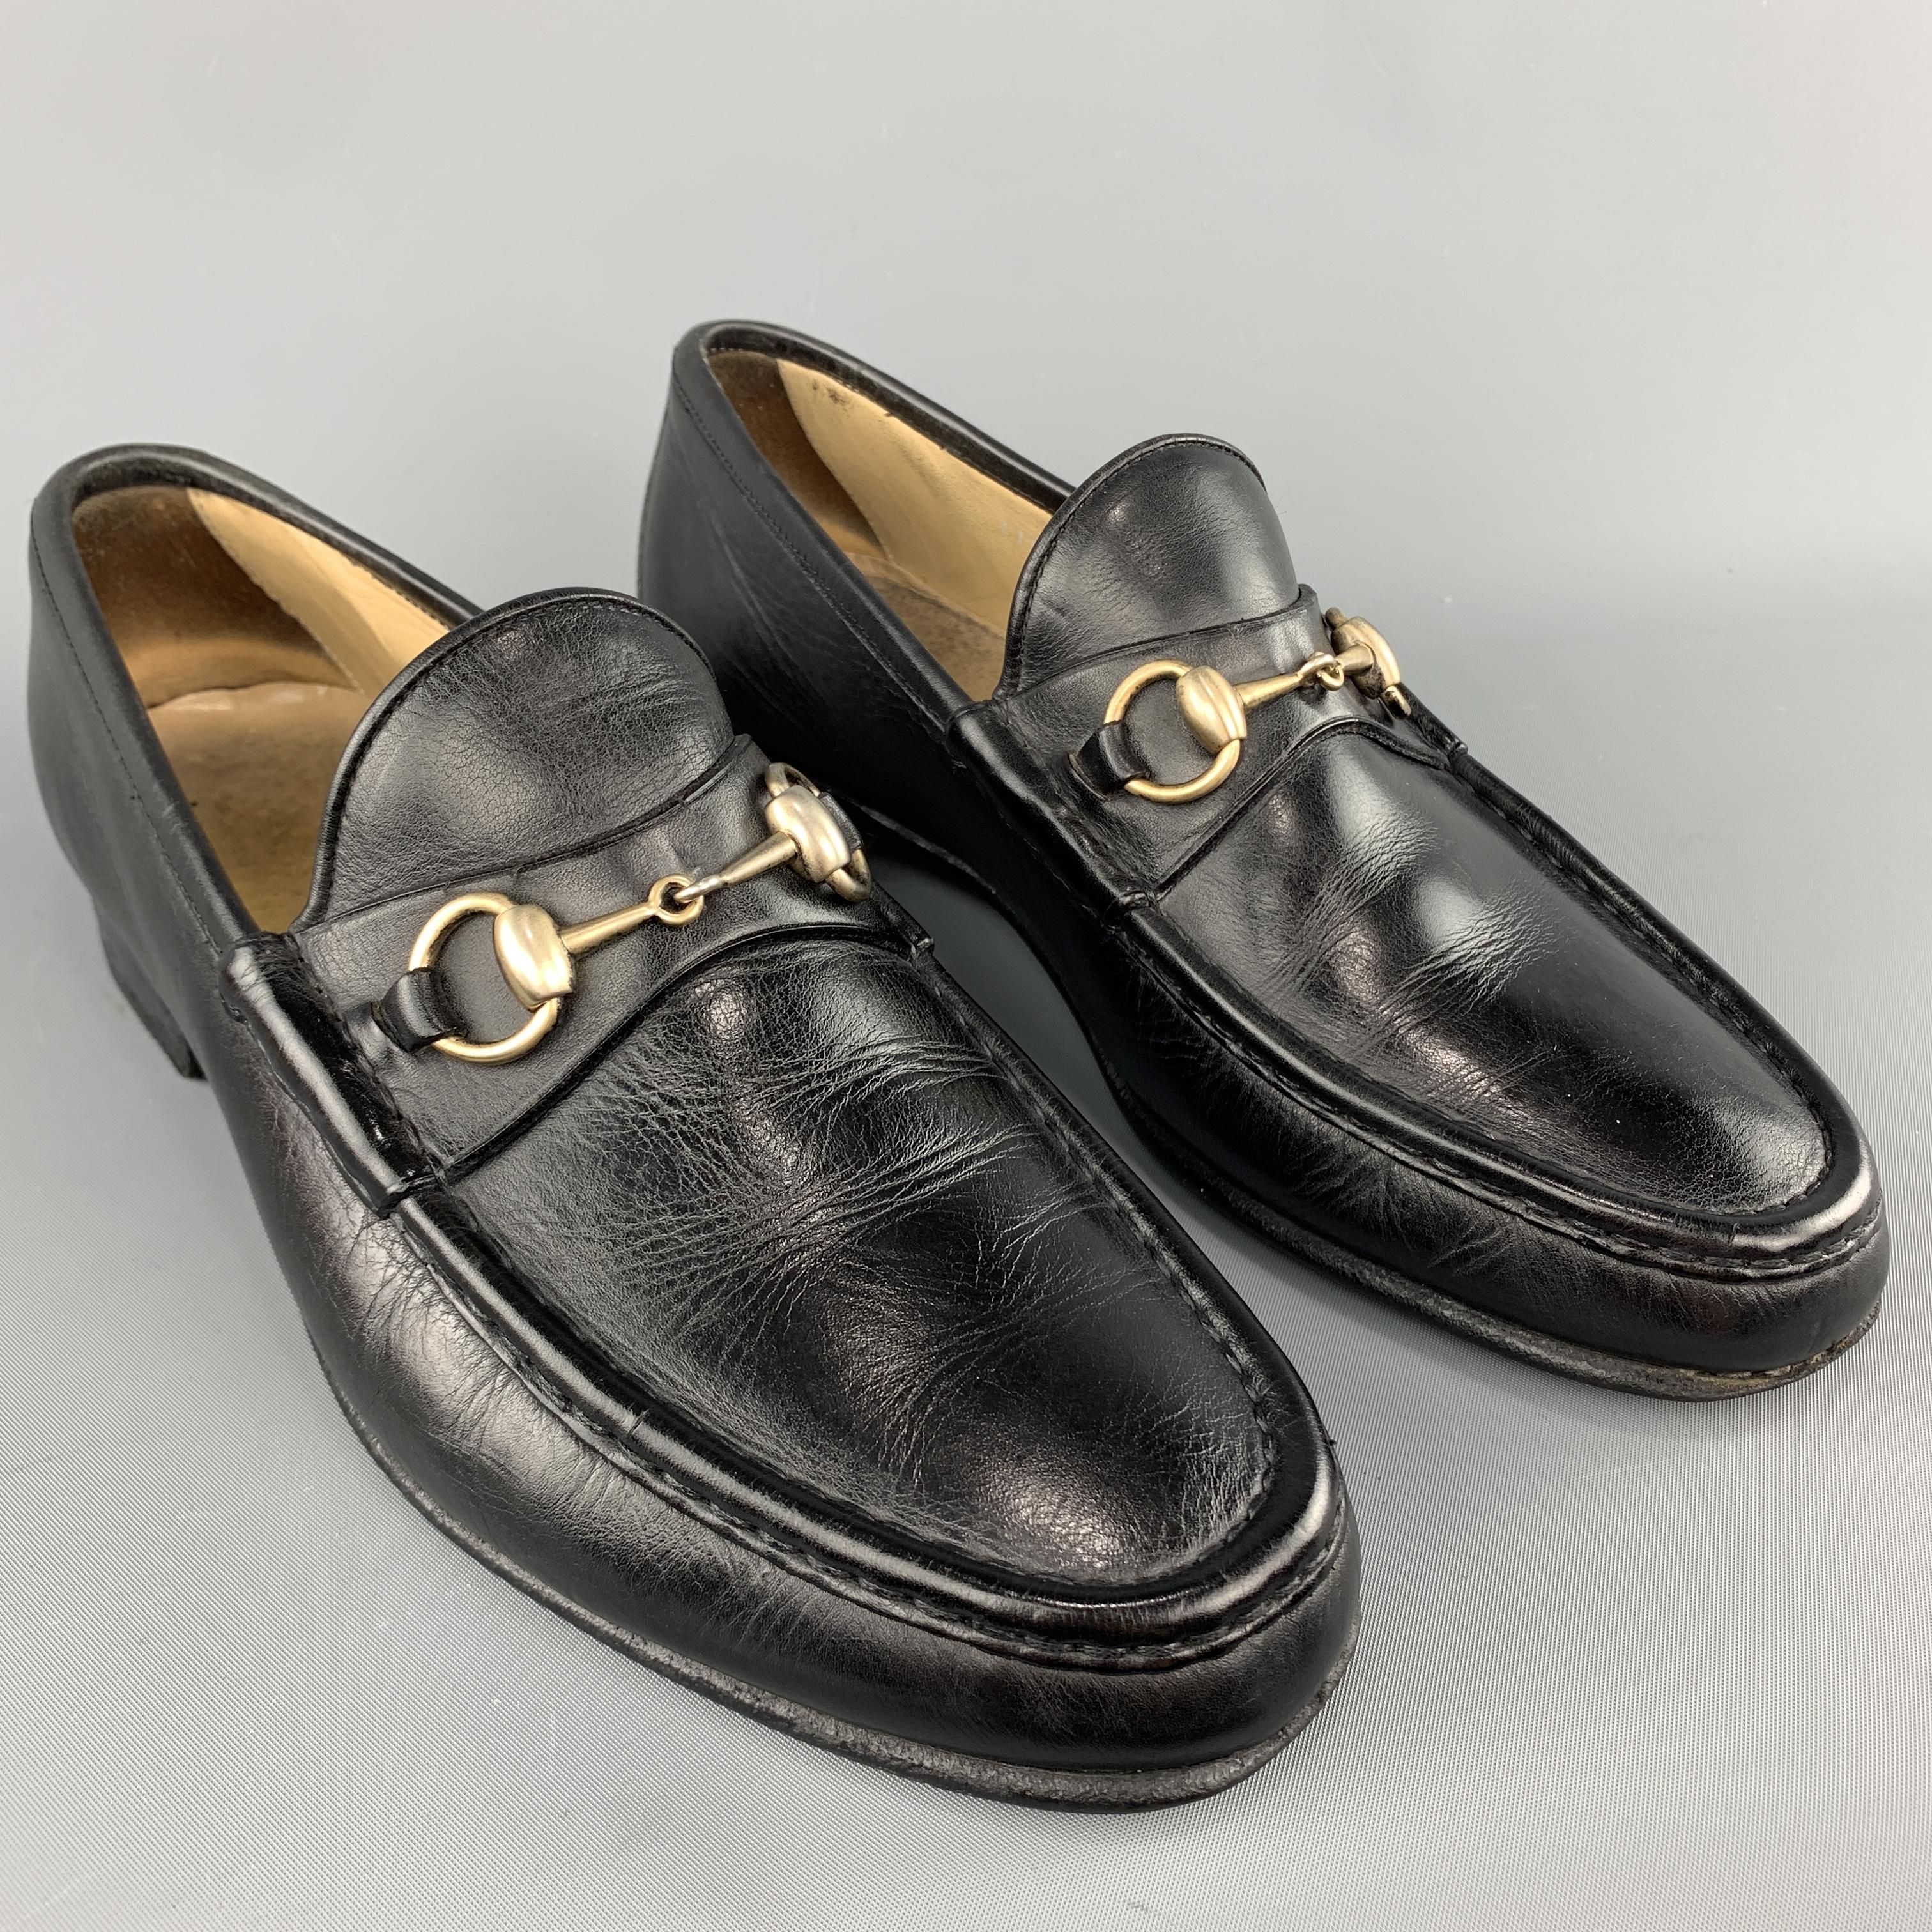 Vintage Gucci loafers come in black leather with an apron toe and light gold tone horsebit hardware. Wear throughout. As-is. Made in Italy.
 

Good Pre-Owned Condition.
Marked: IT 43.5

Outsole: 11.15 x 3.75 in.